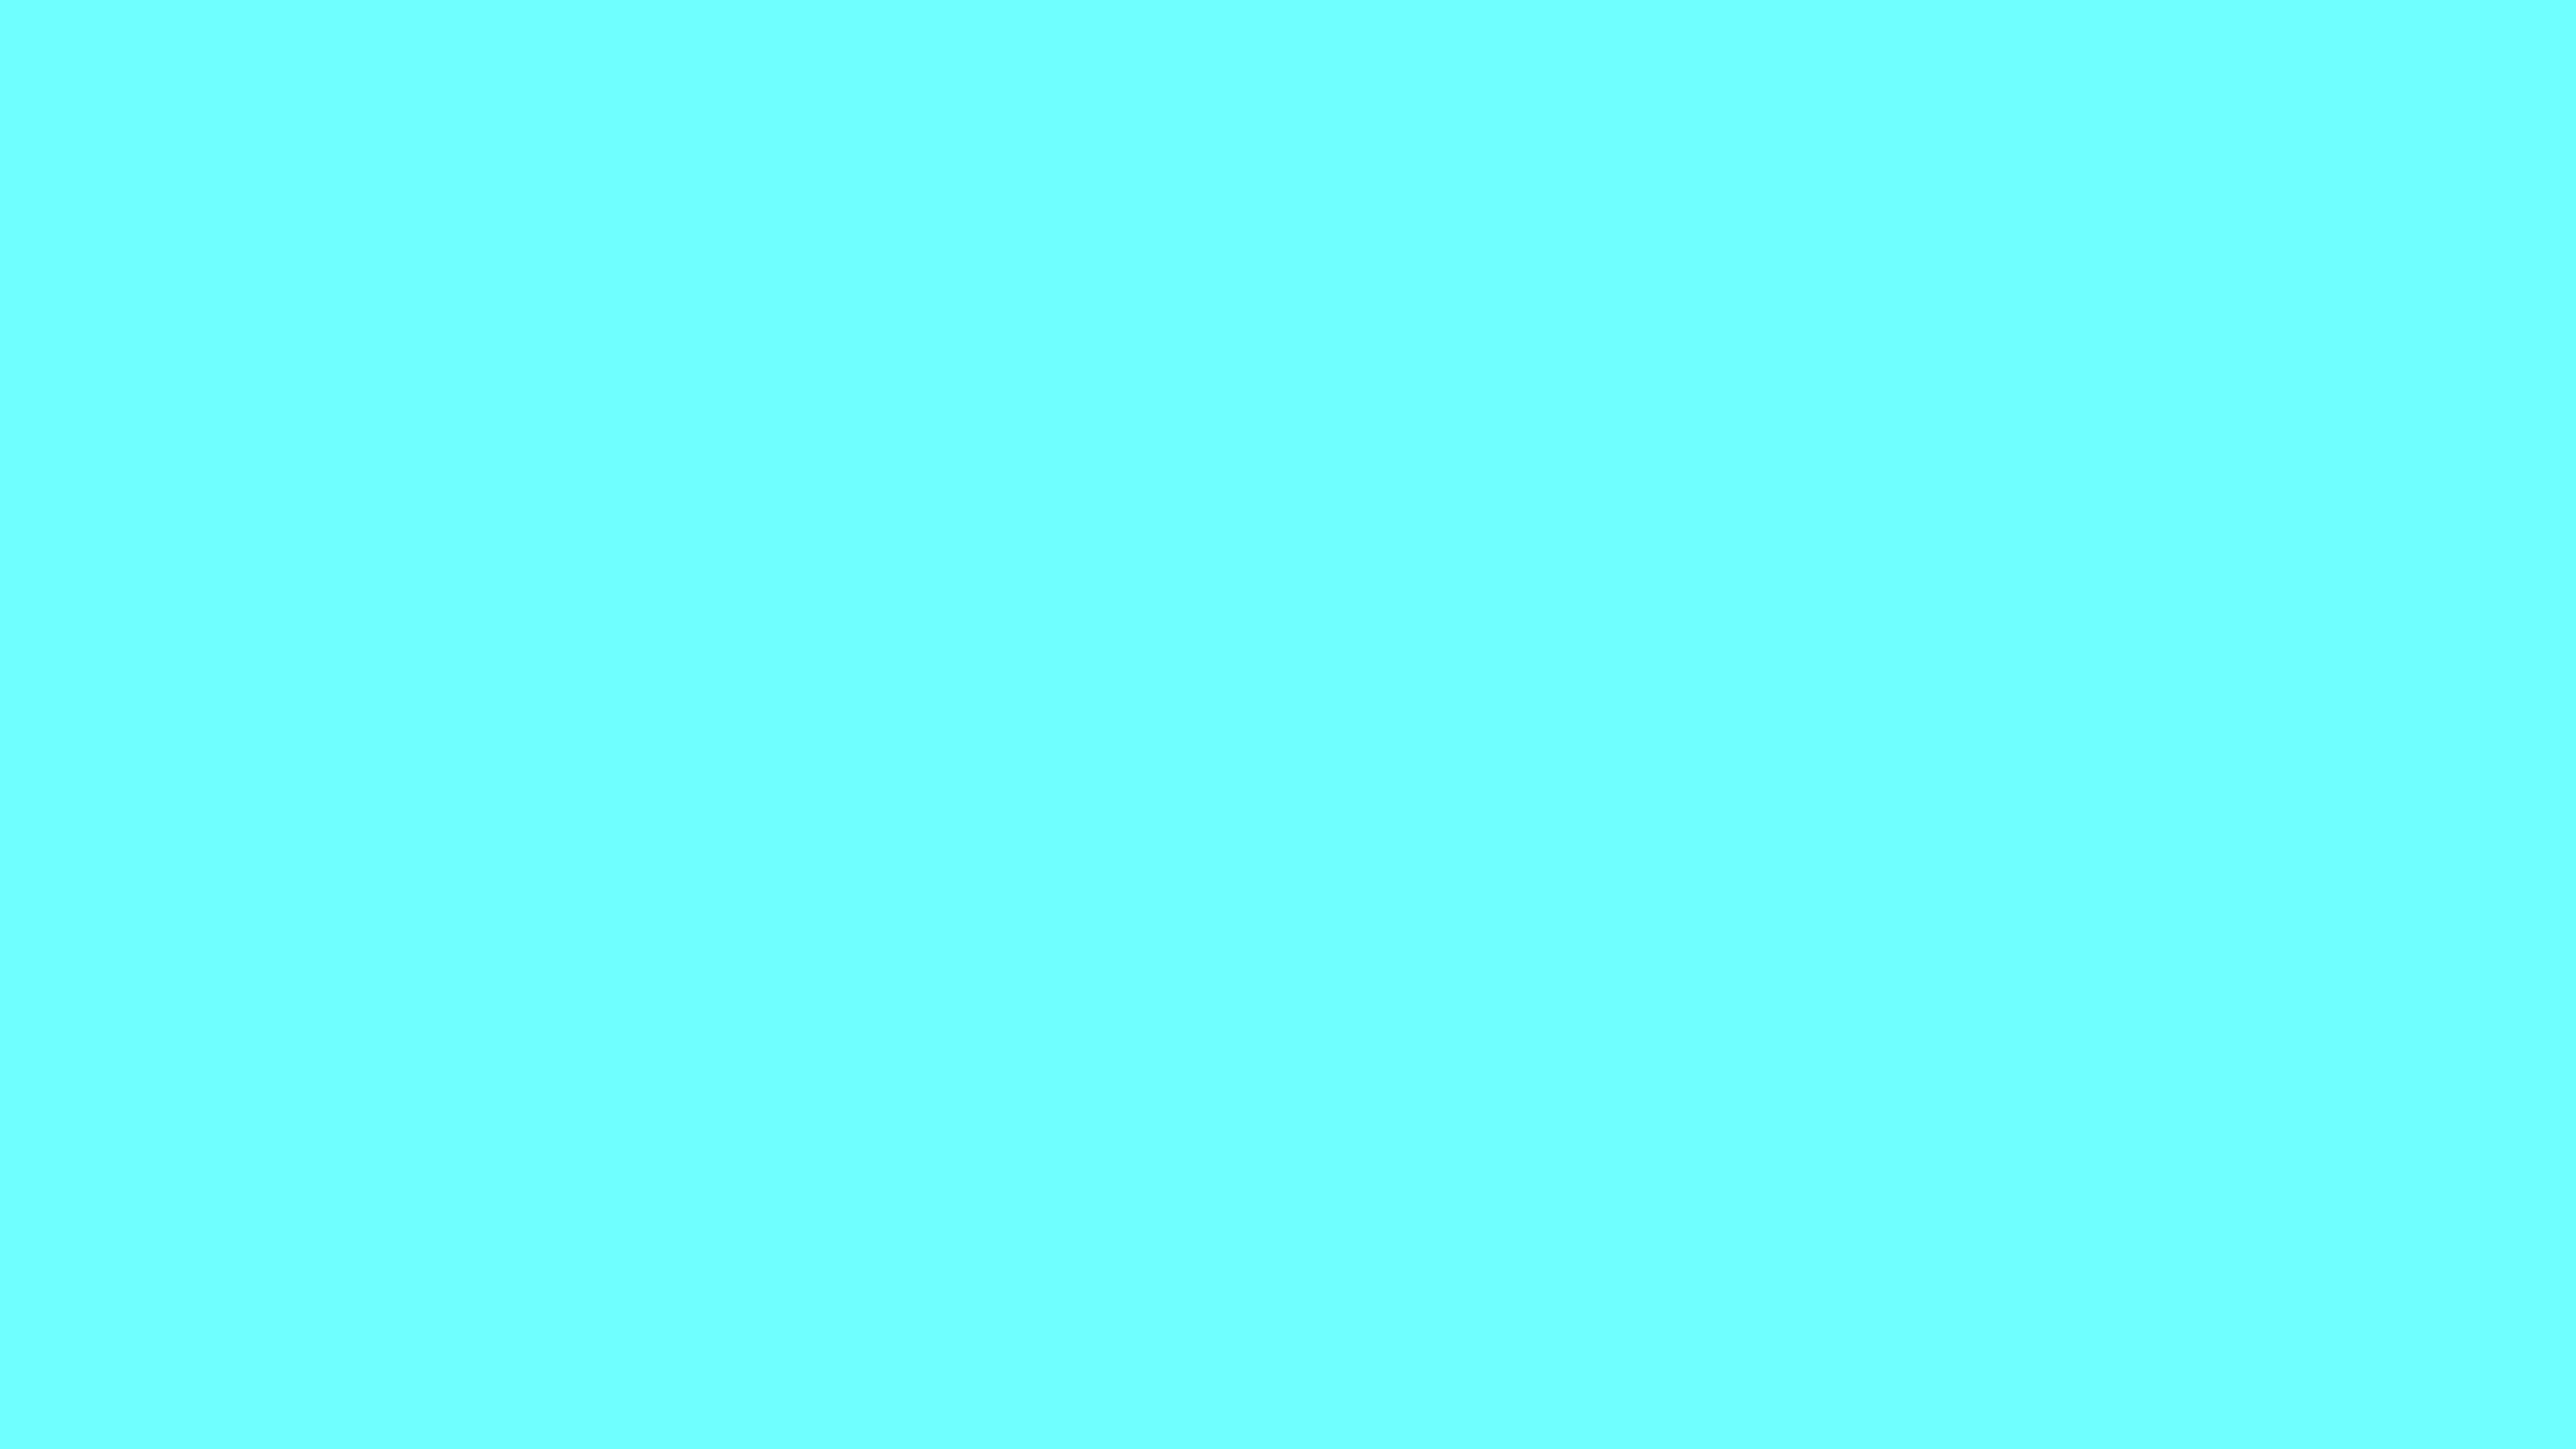 Aggressive Baby Blue Solid Color Background Image Free Image Generator